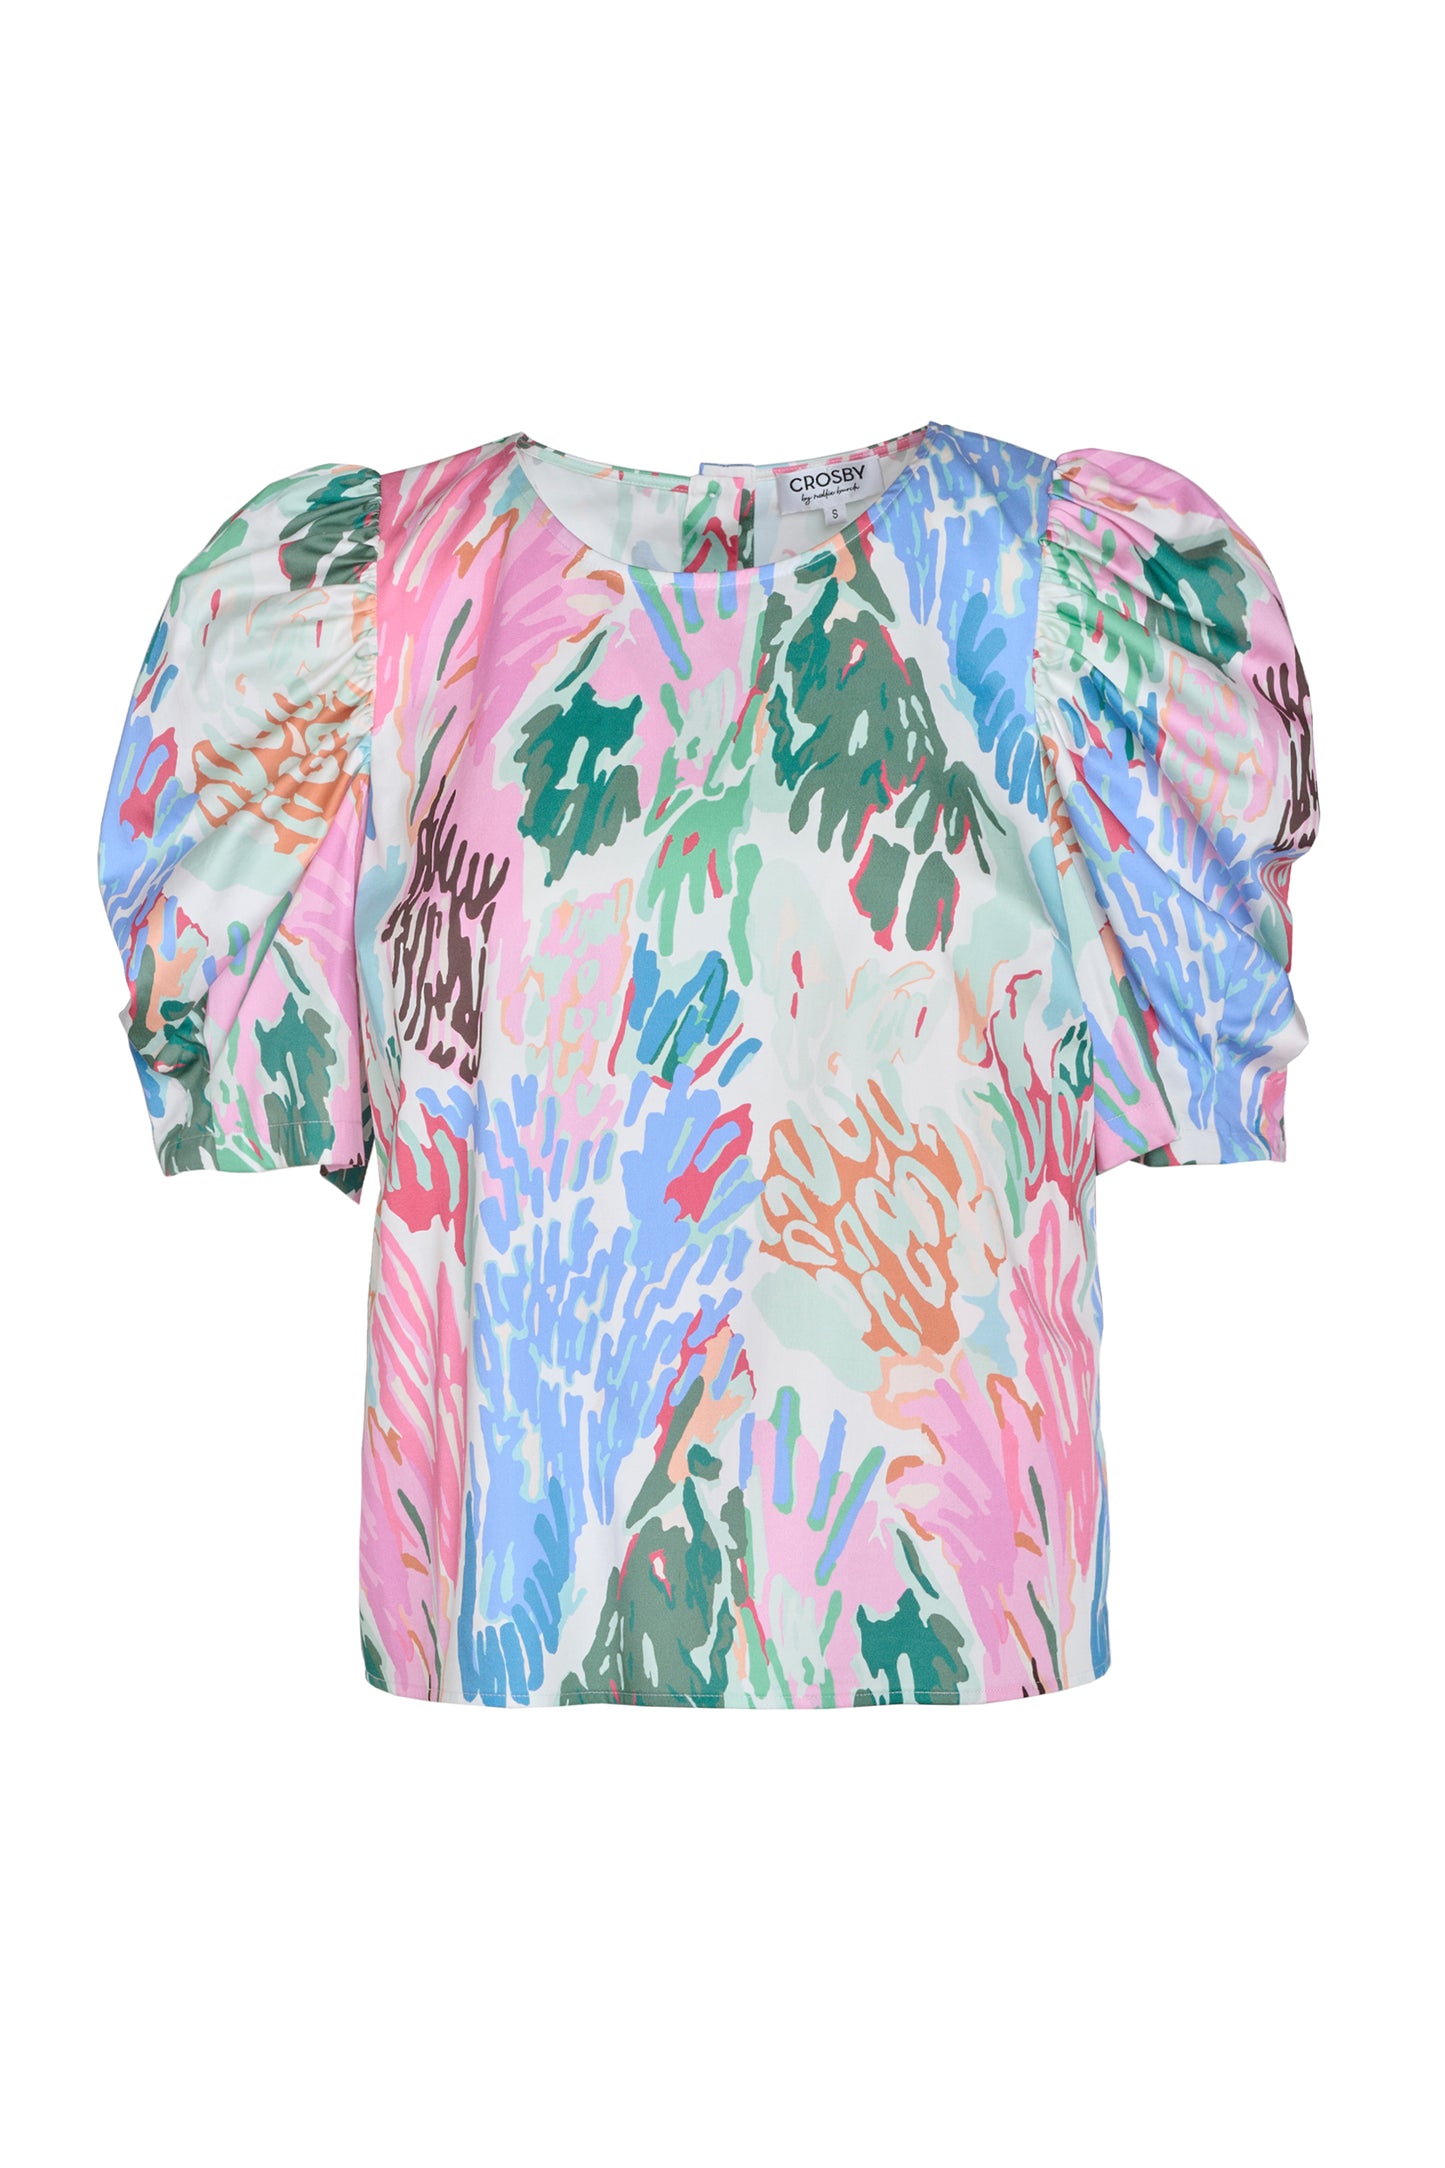 Rudy Top in Painted Garden | CROSBY by Mollie Burch